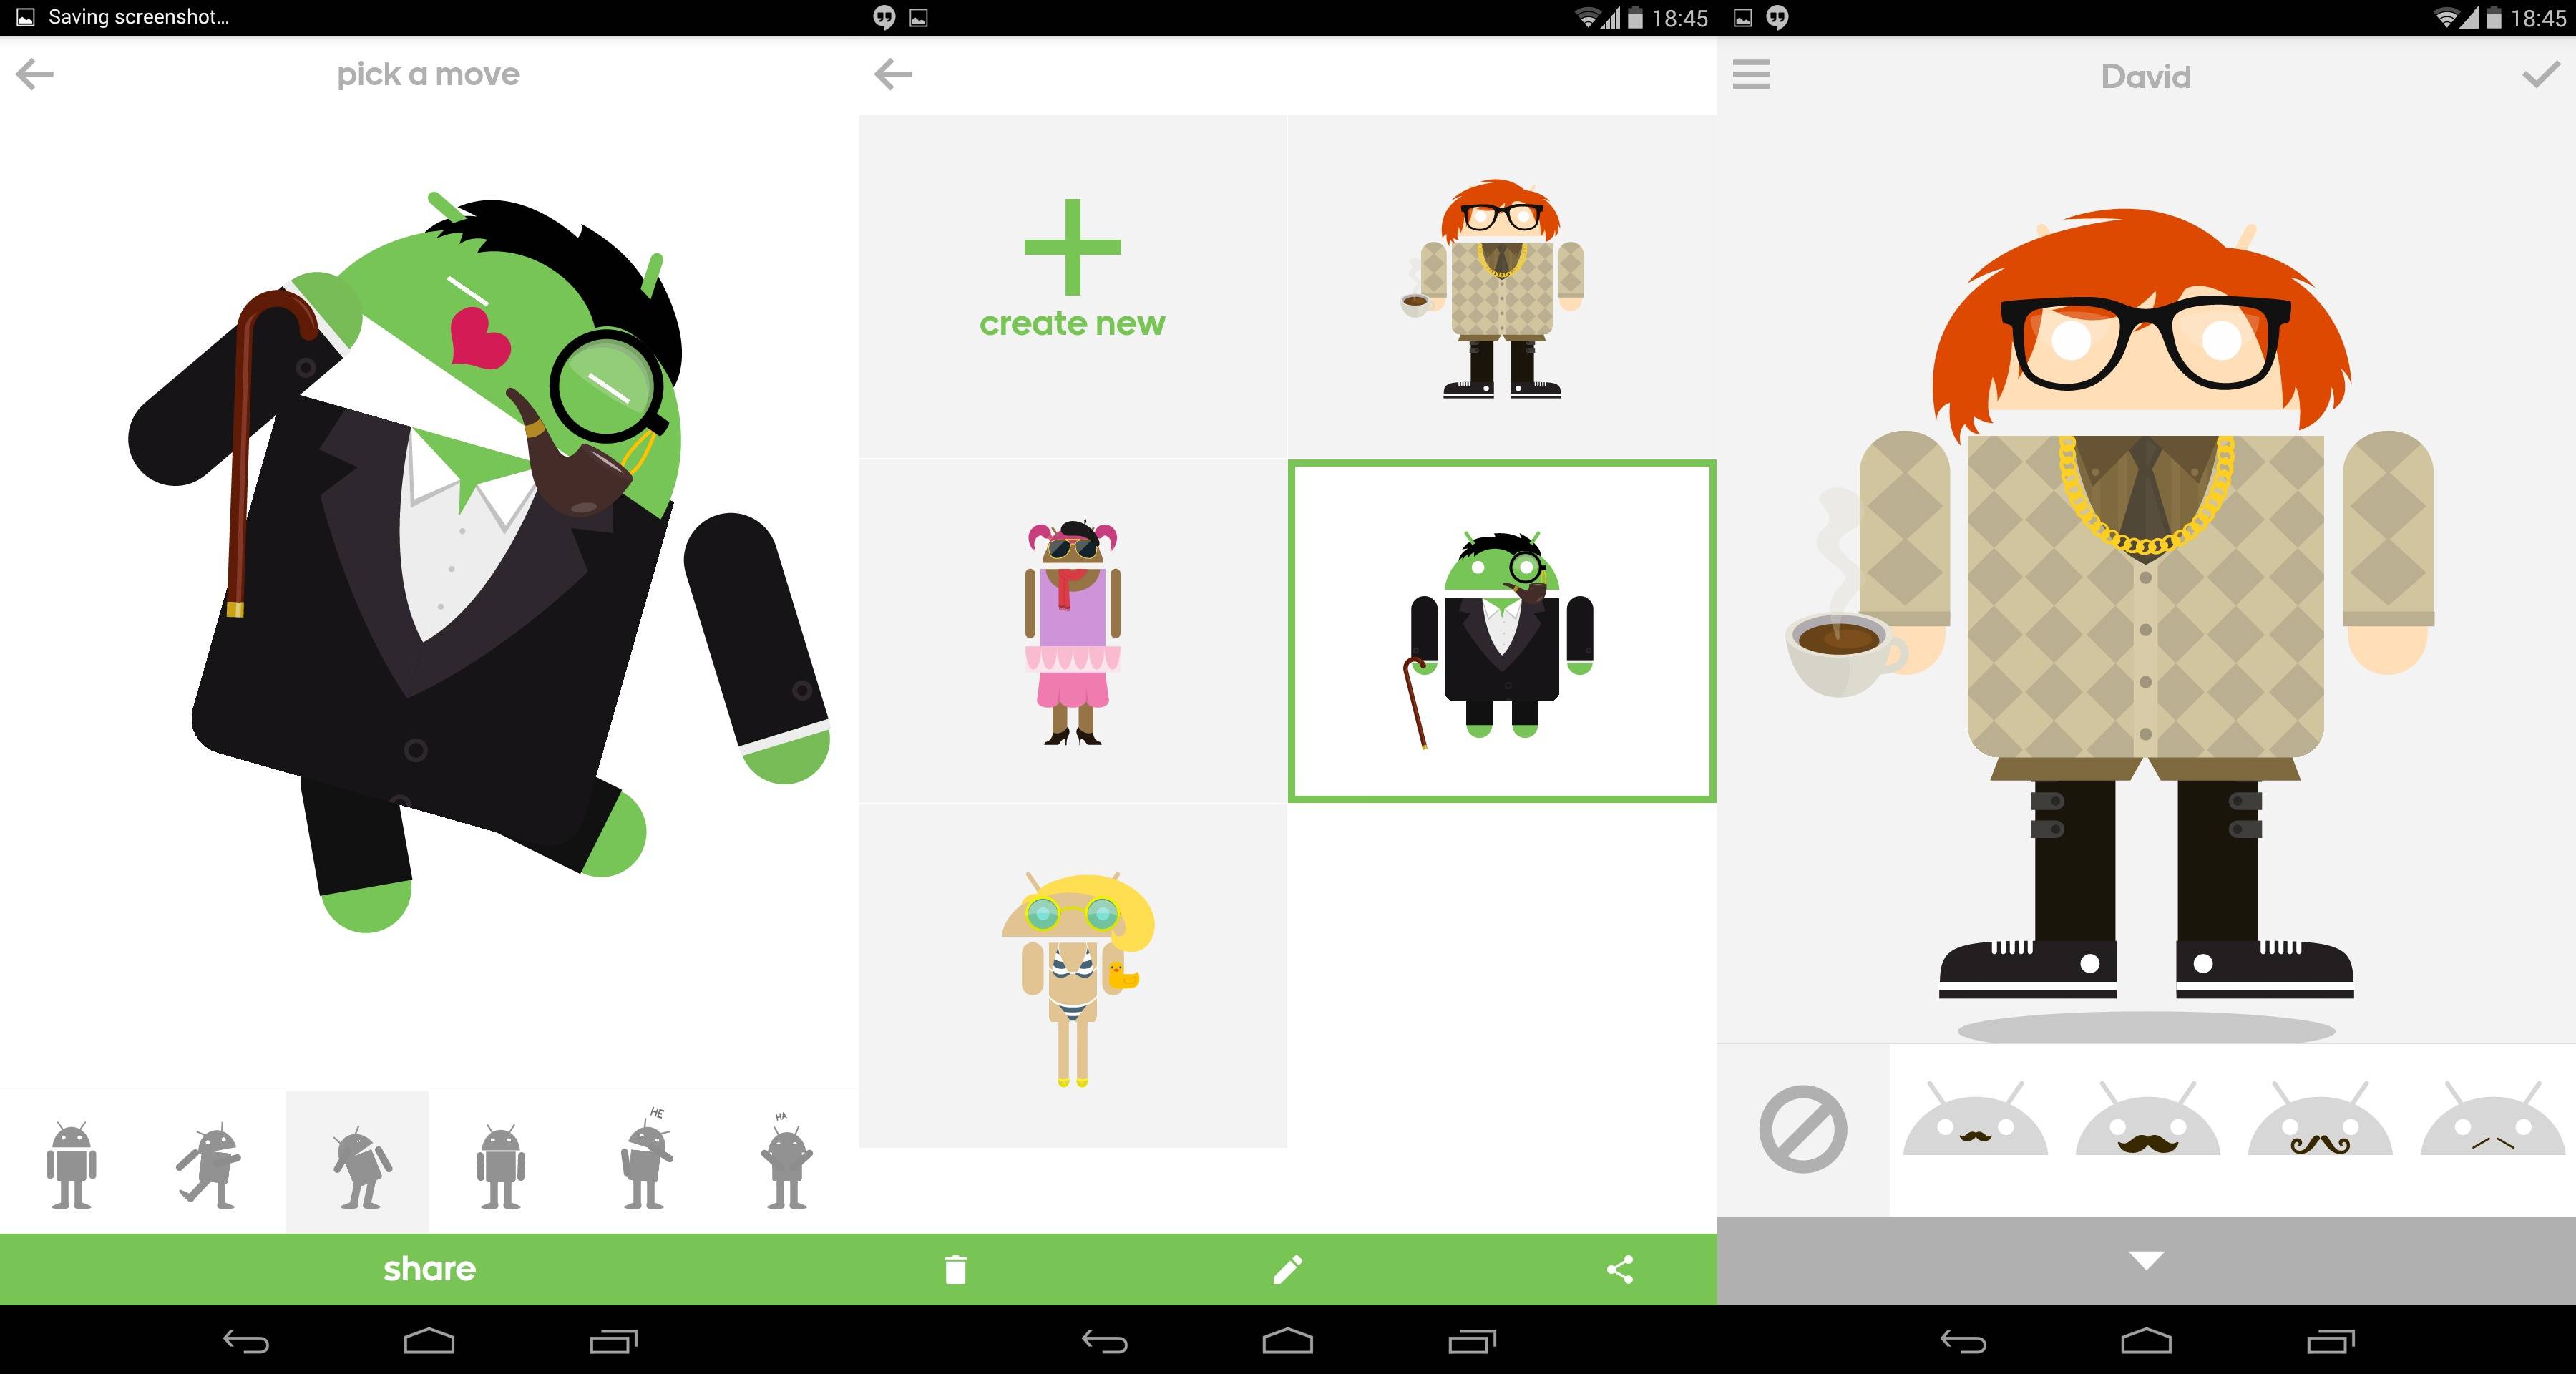 Androidify Update Animated Gifs More Sharing Options Android Community